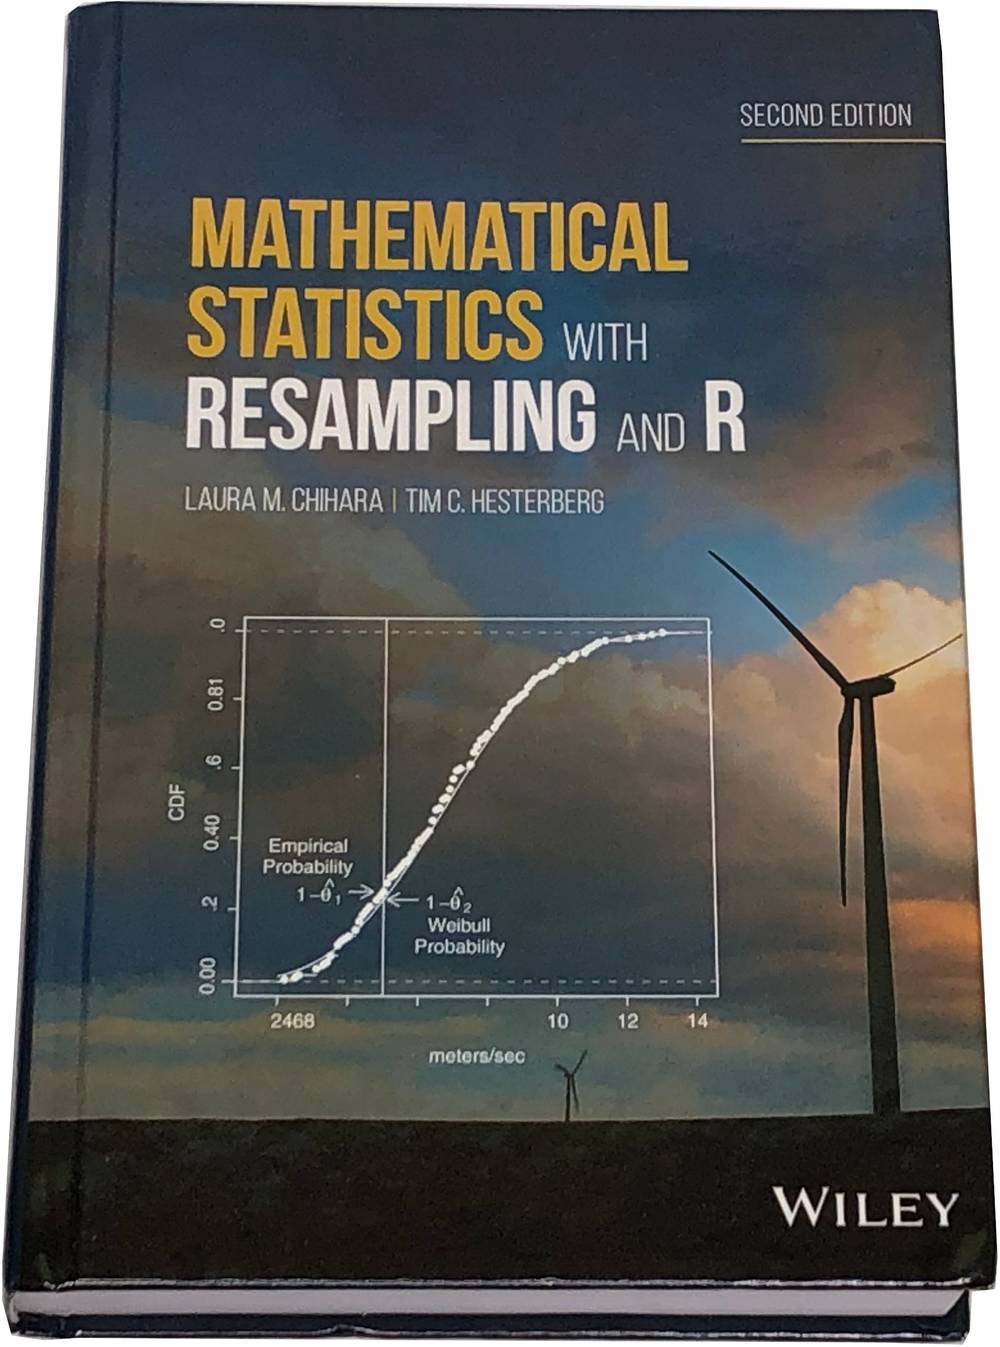 Book image of Mathematical Statistics with Resampling and R.